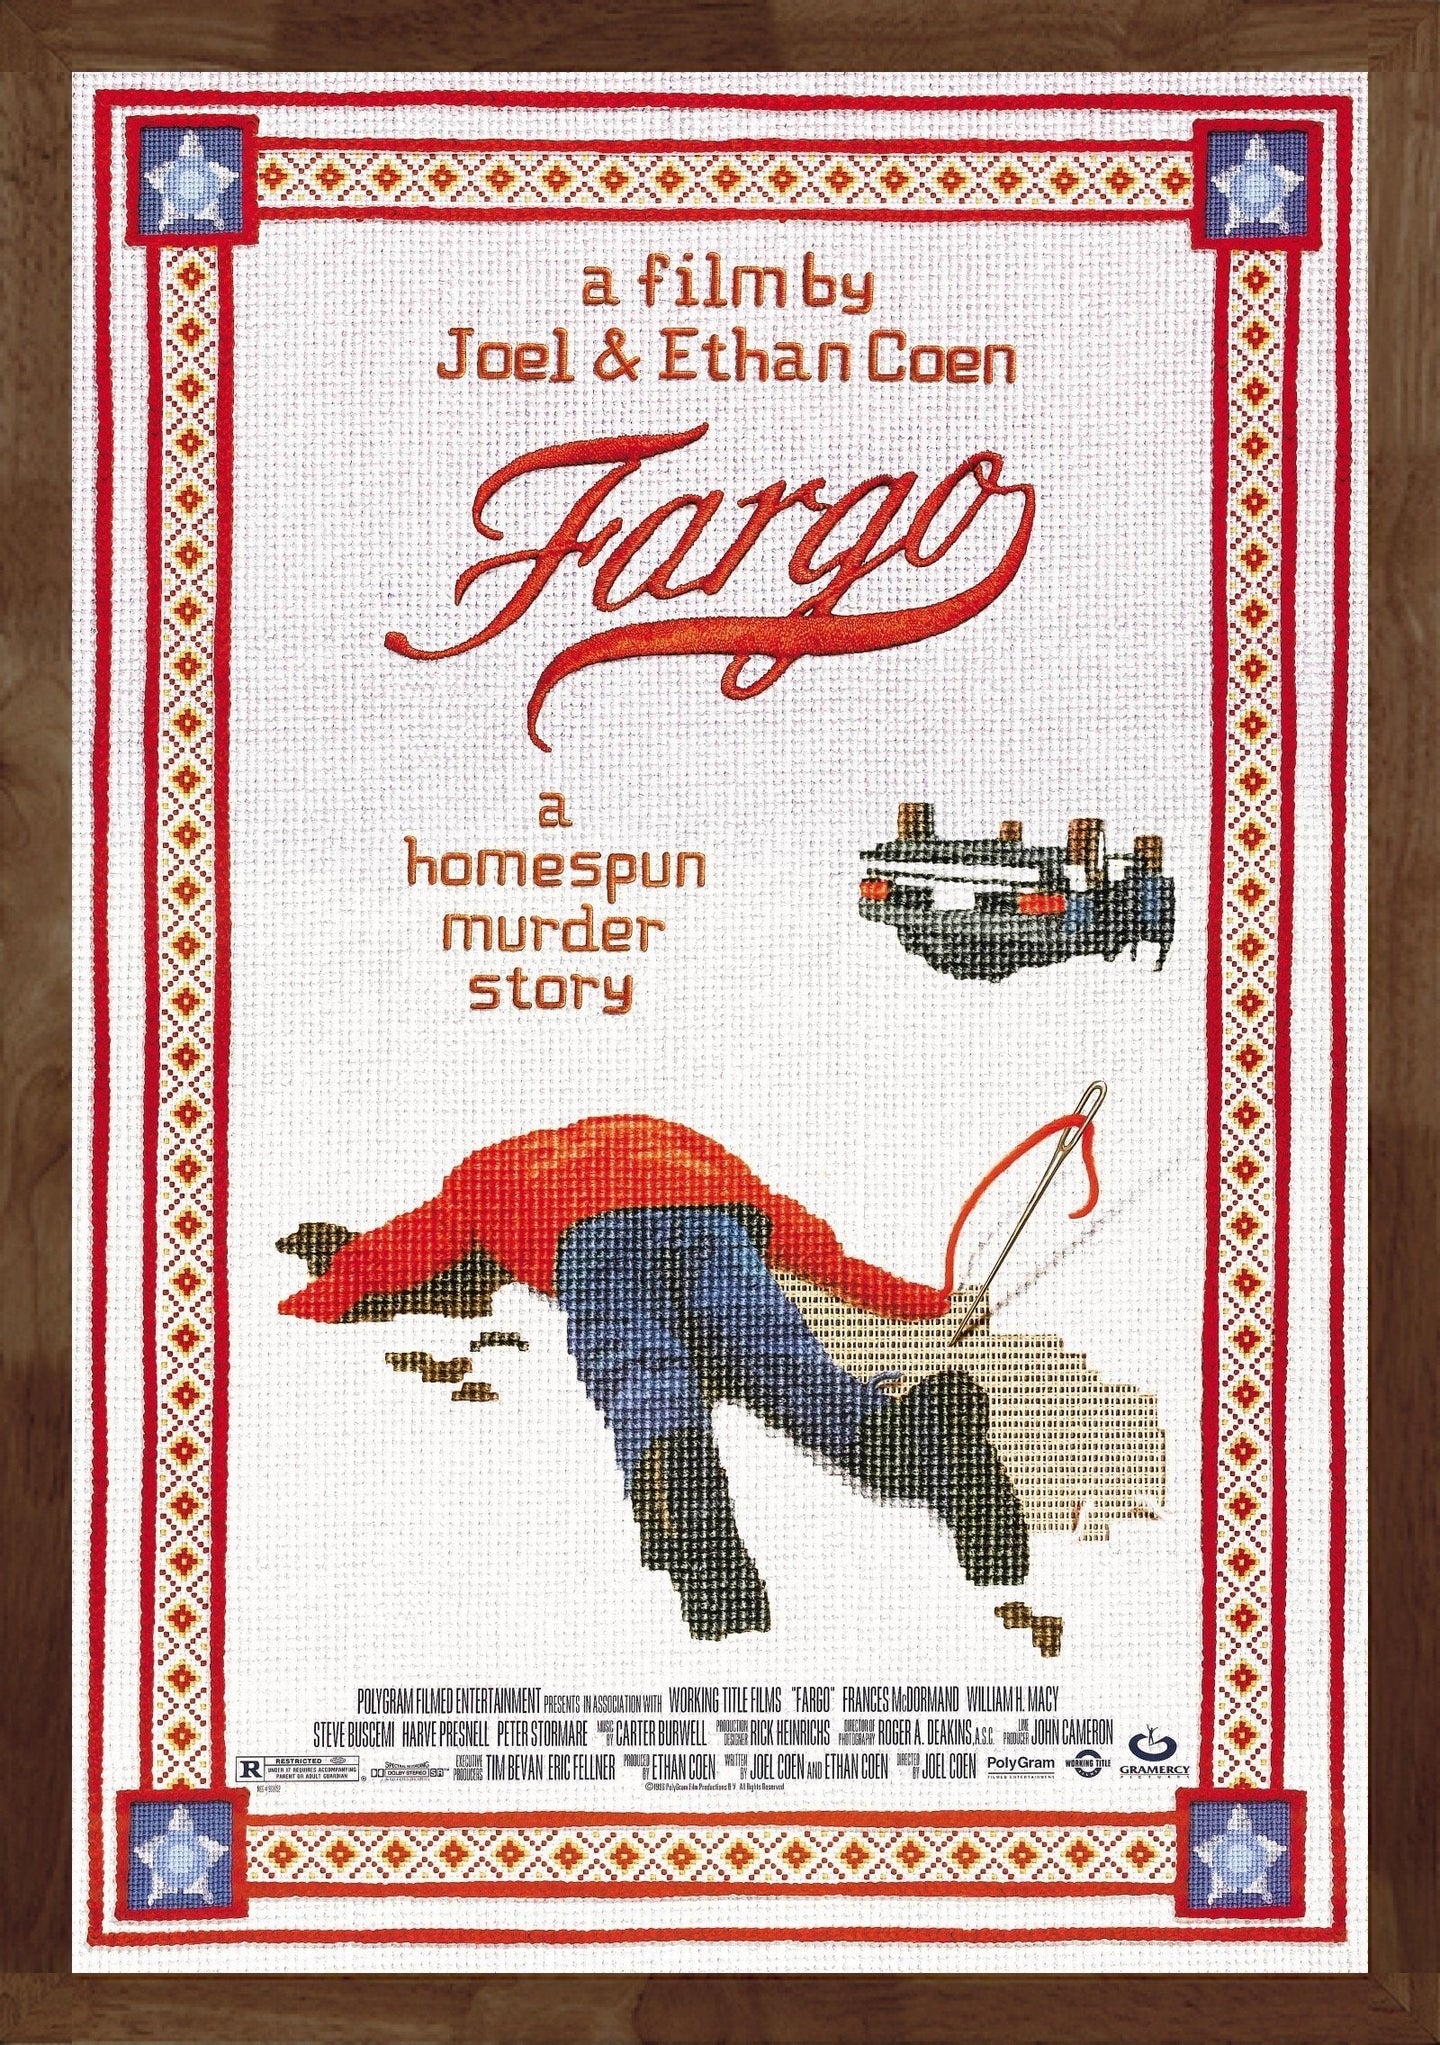 An original movie poster for the Coen Brothers' film Fargo